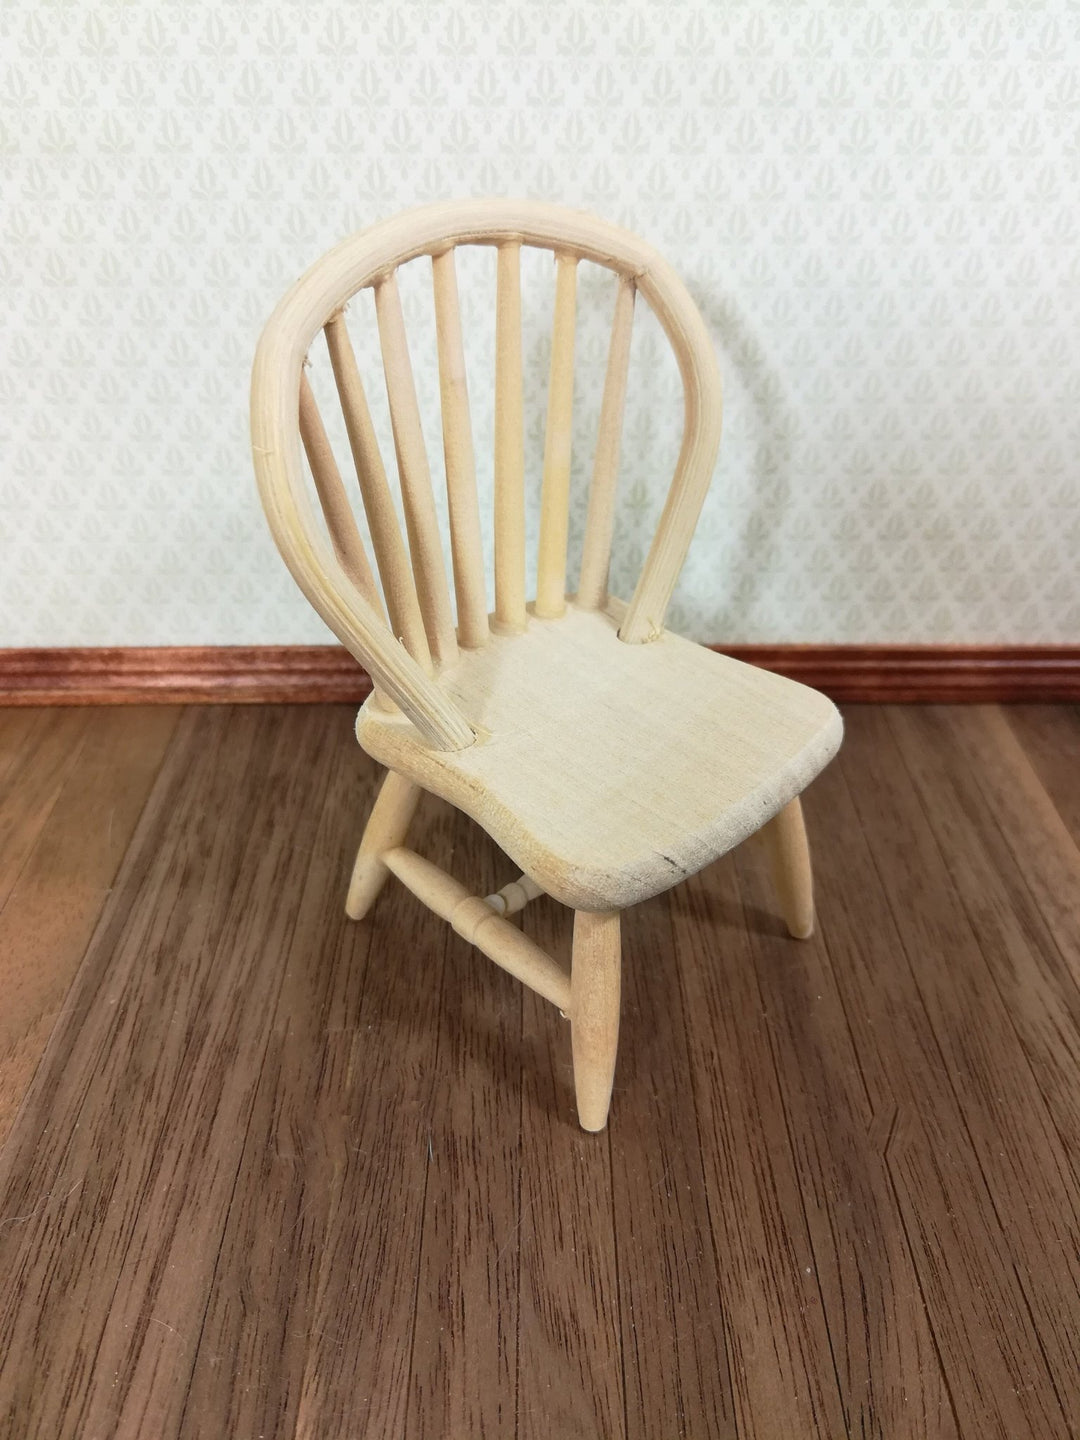 Dollhouse Miniature Windsor Spindle Back Kitchen Chair Unfinished Wood 1:12 Scale - Miniature Crush